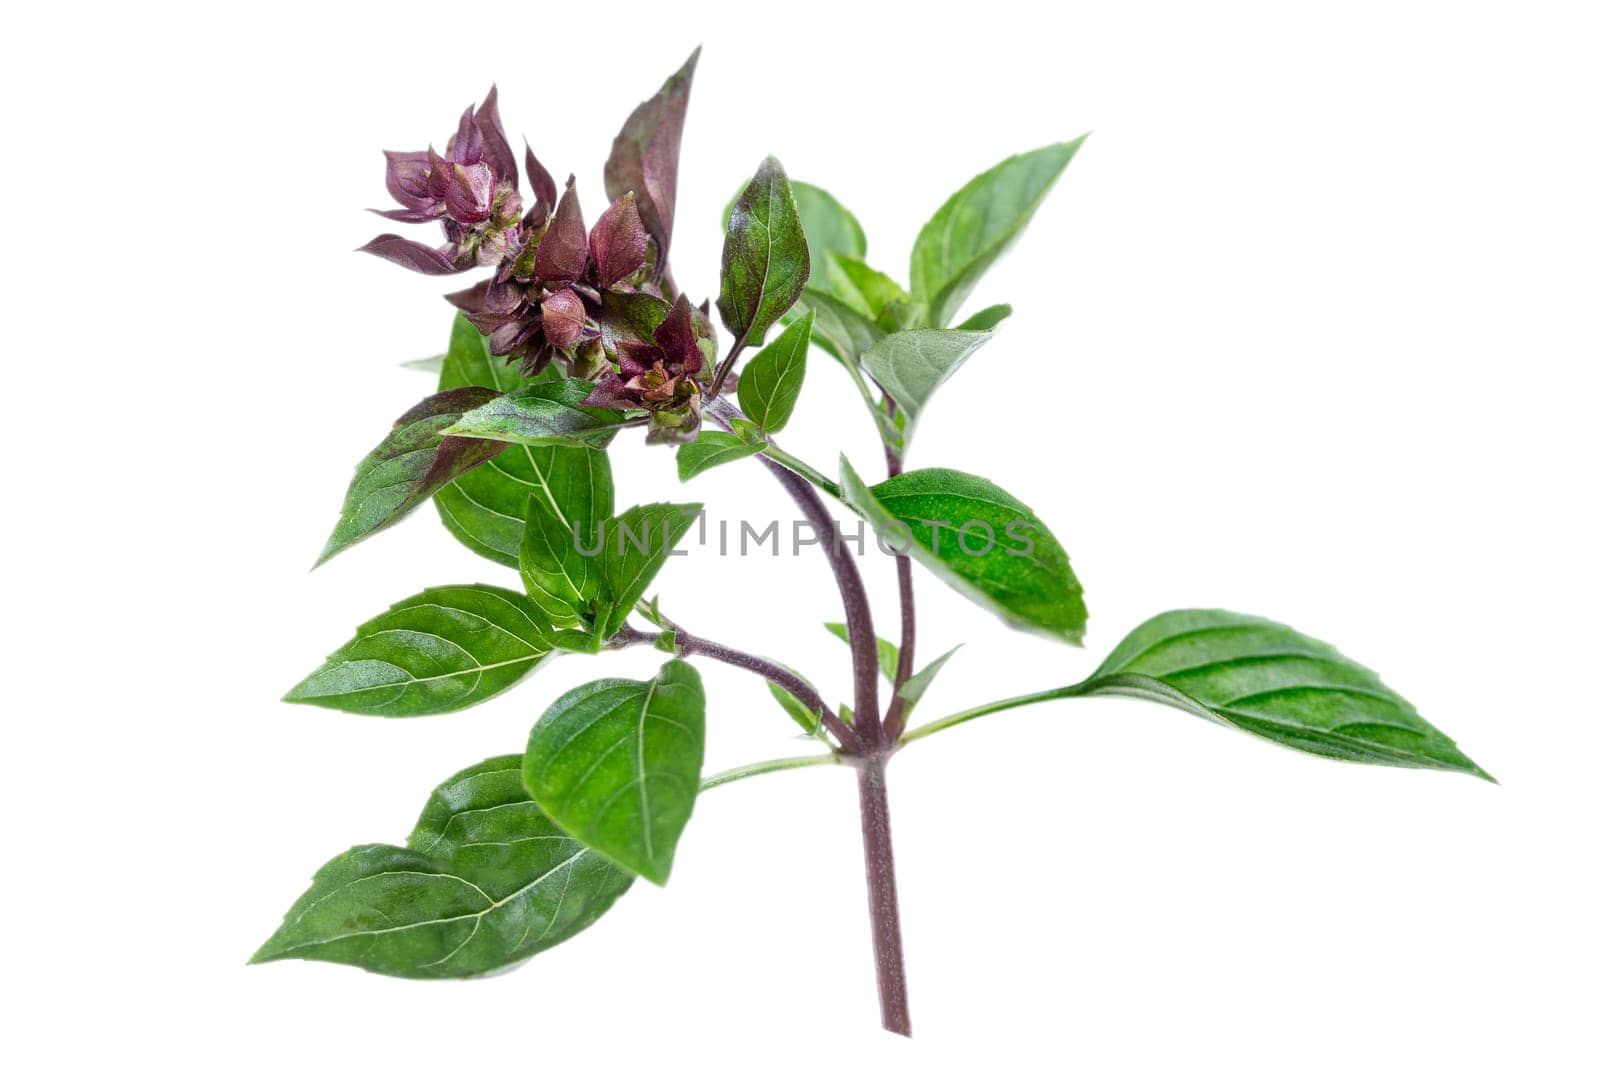 Red rubin basil bush This basil variety has unusual reddish-purple leaves, and a stronger flavour than sweet basil, making it most appealing for salads and garnishes. isolated on white background by JPC-PROD